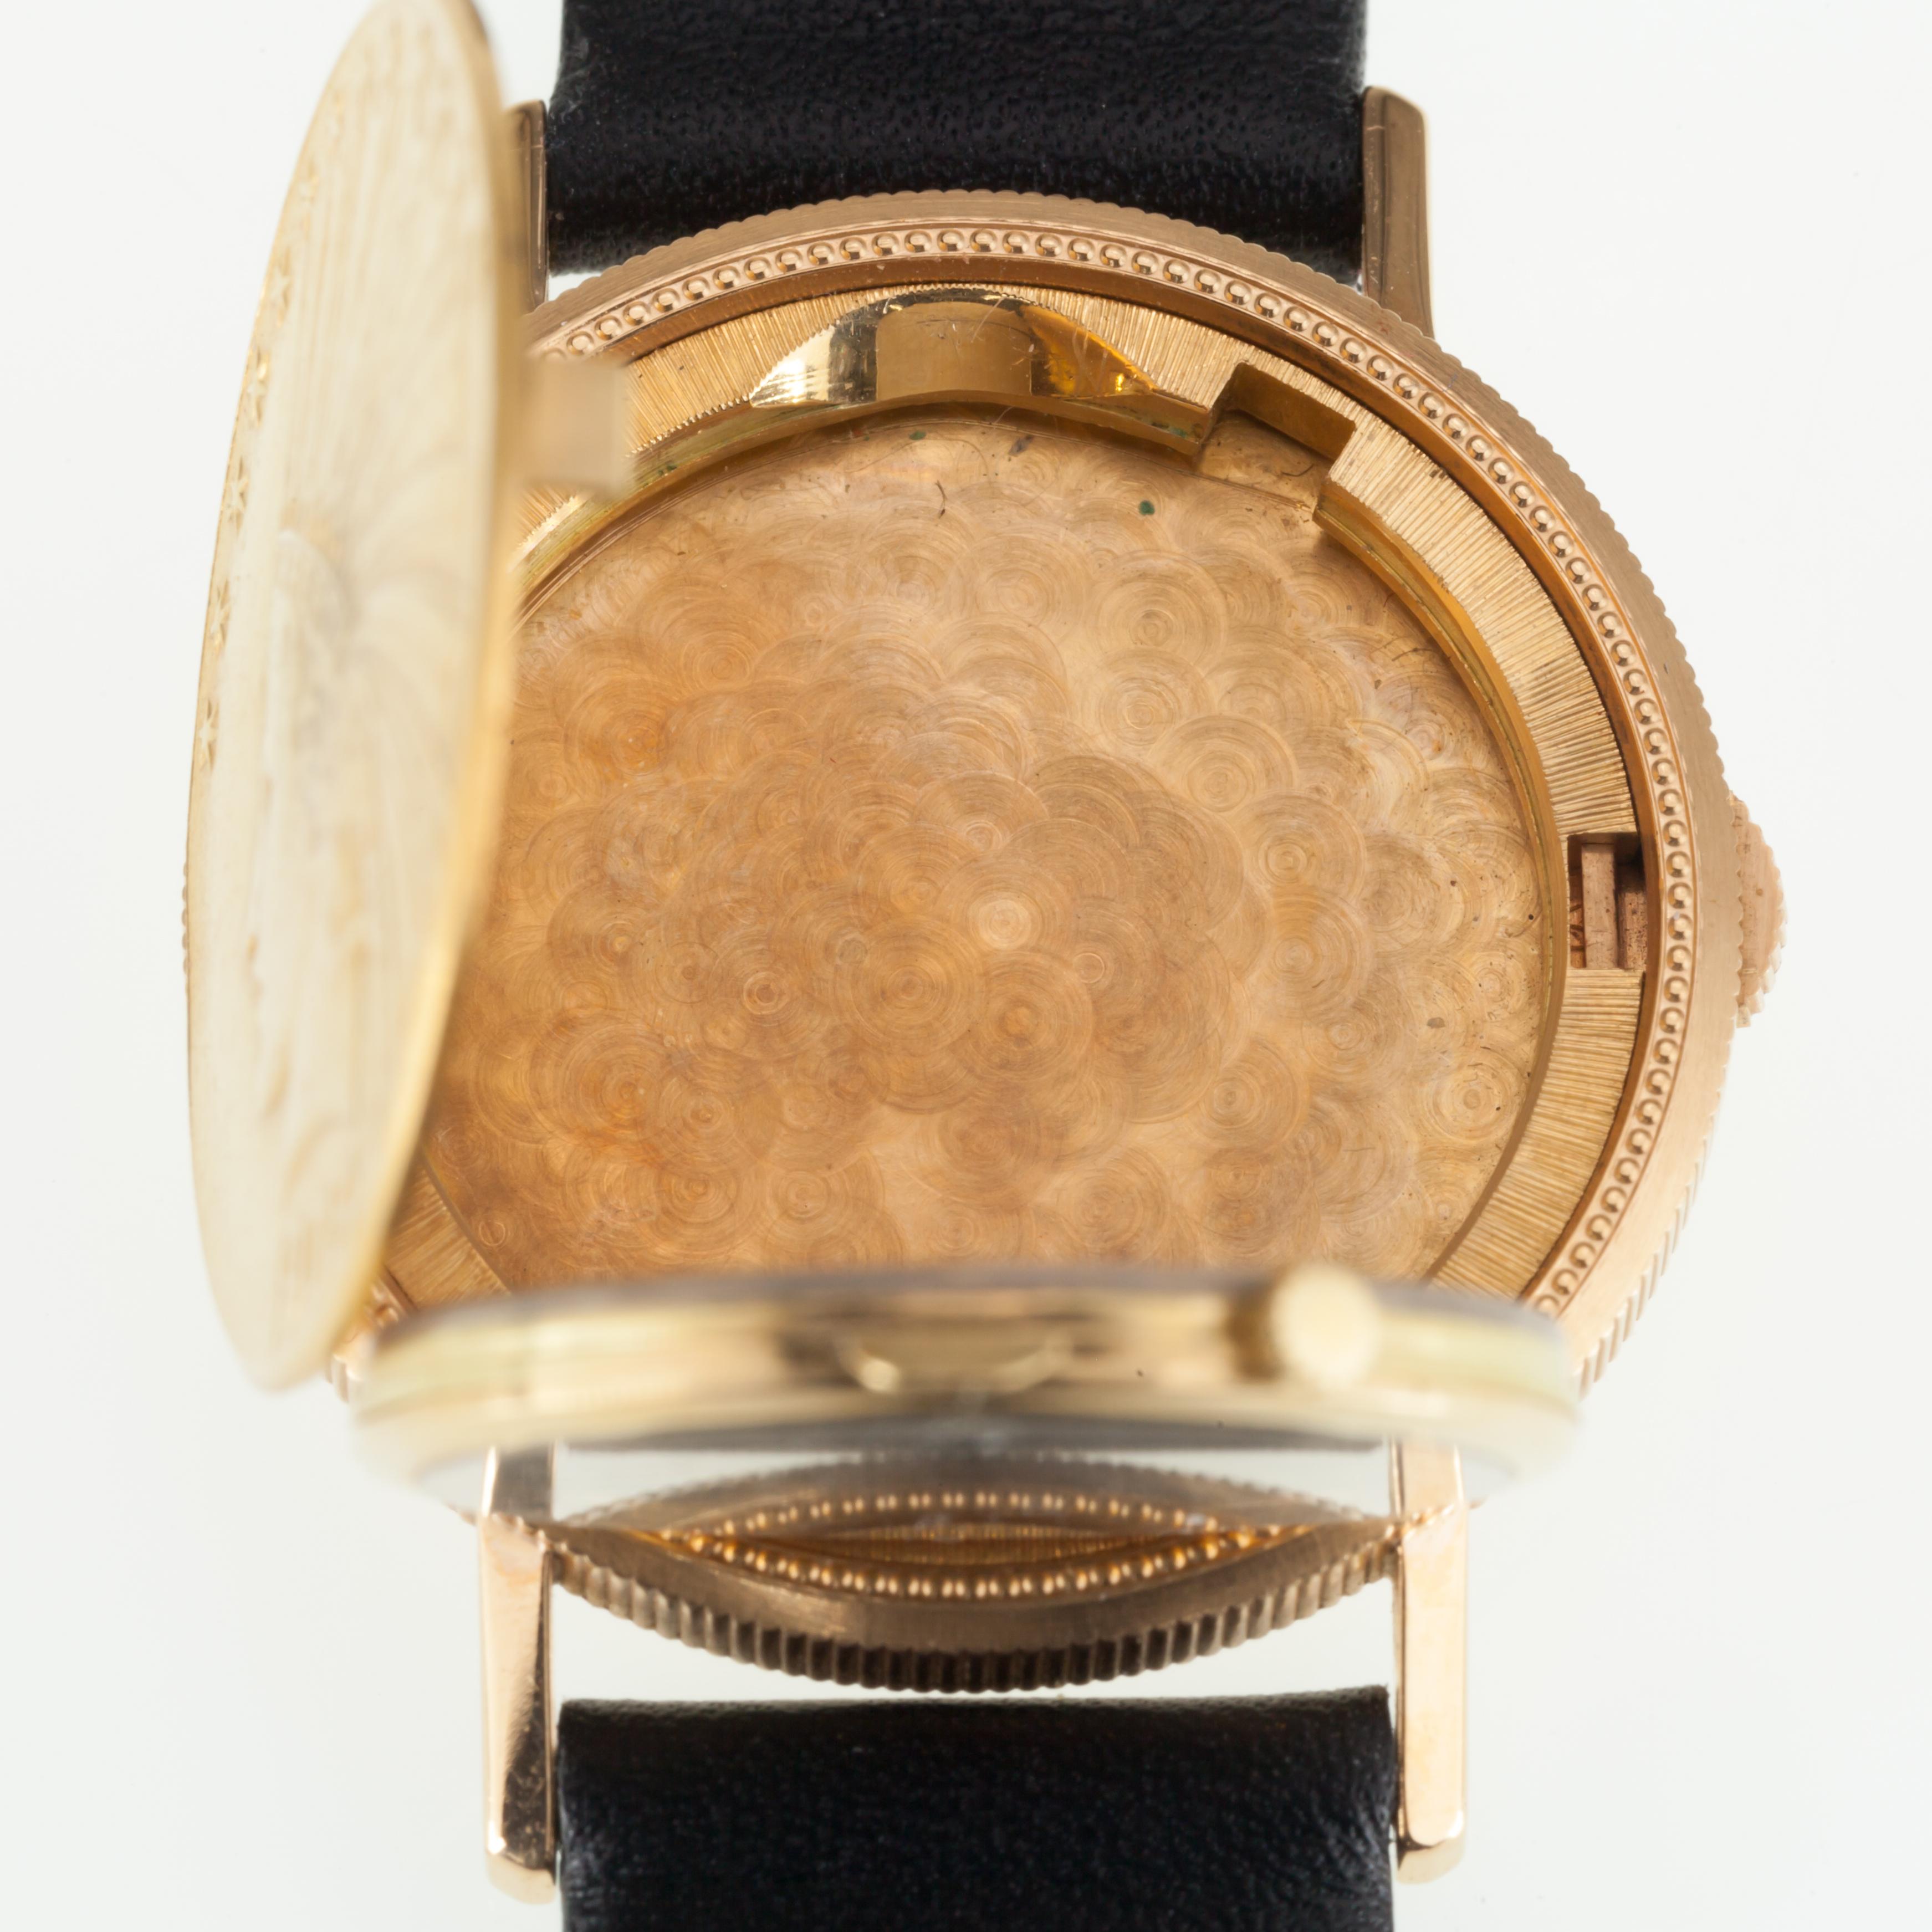 Modern Vintage Leuba Louis 18k $10 Gold Indian Watch with Leather Band, Eagle Reverse